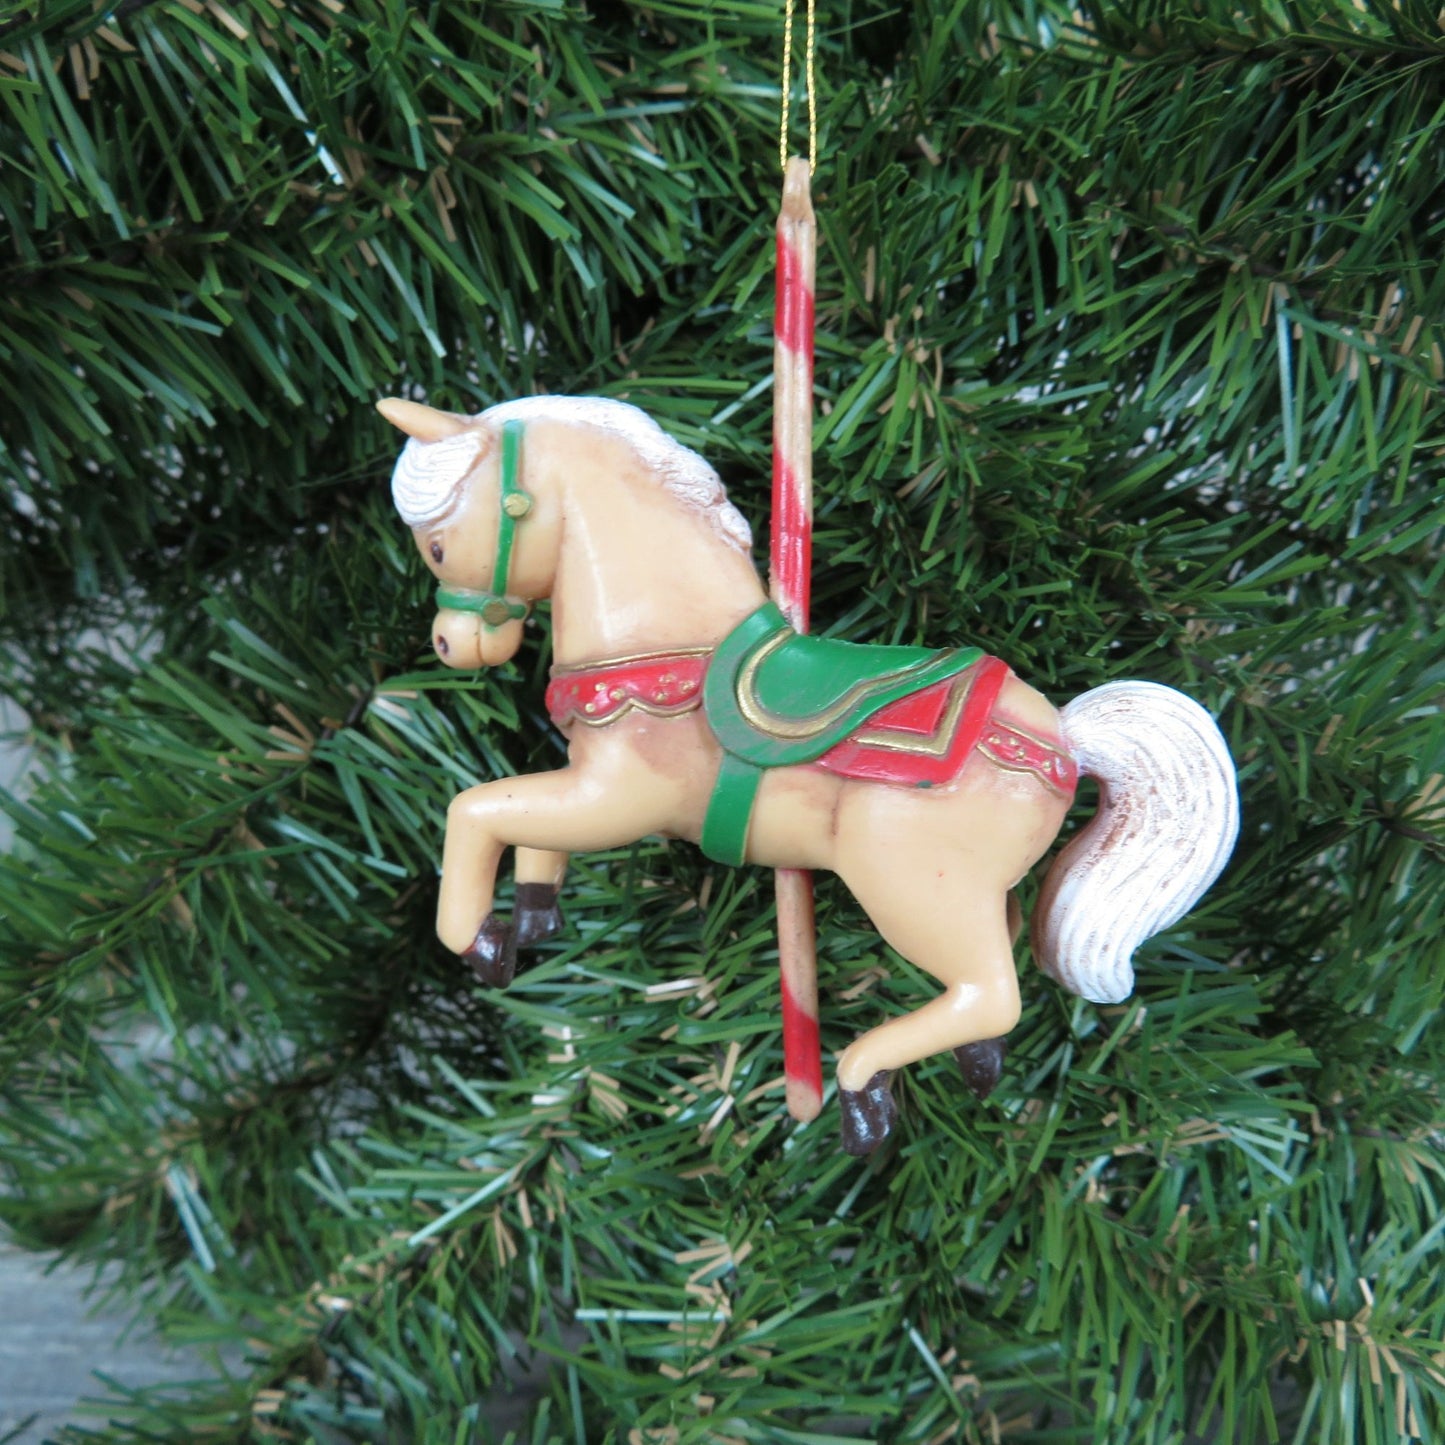 Vintage Tan and White Carousel Horse Pony Ornament Plastic Christmas